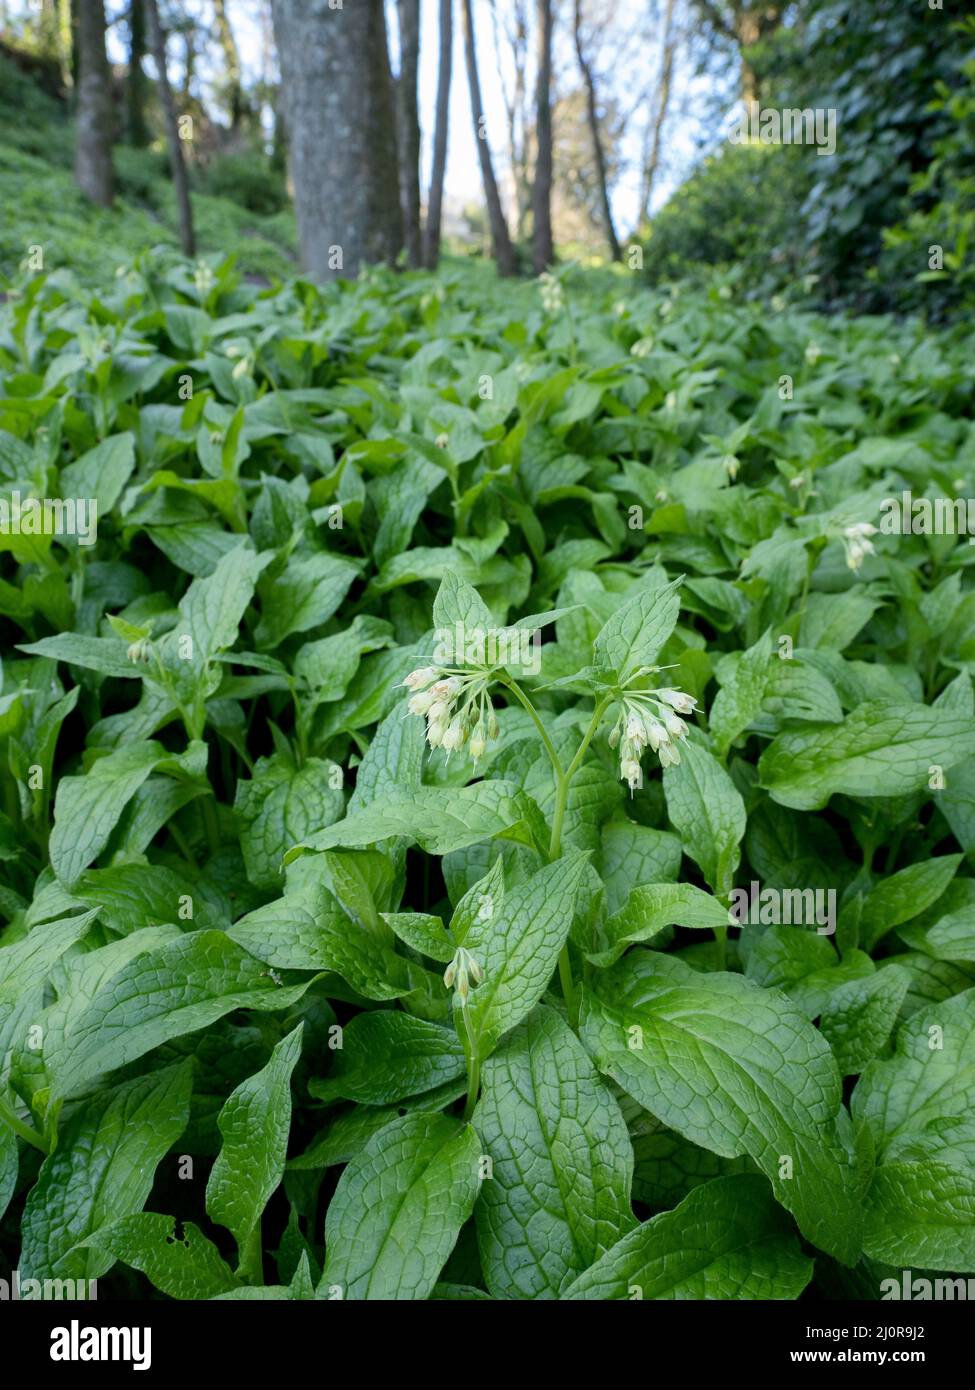 Common Comfrey Symphytum officinale clothing the woodland floor at Pensylvania Wood above Church Ope Cove on the Isle of Portland Dorset UK Stock Photo